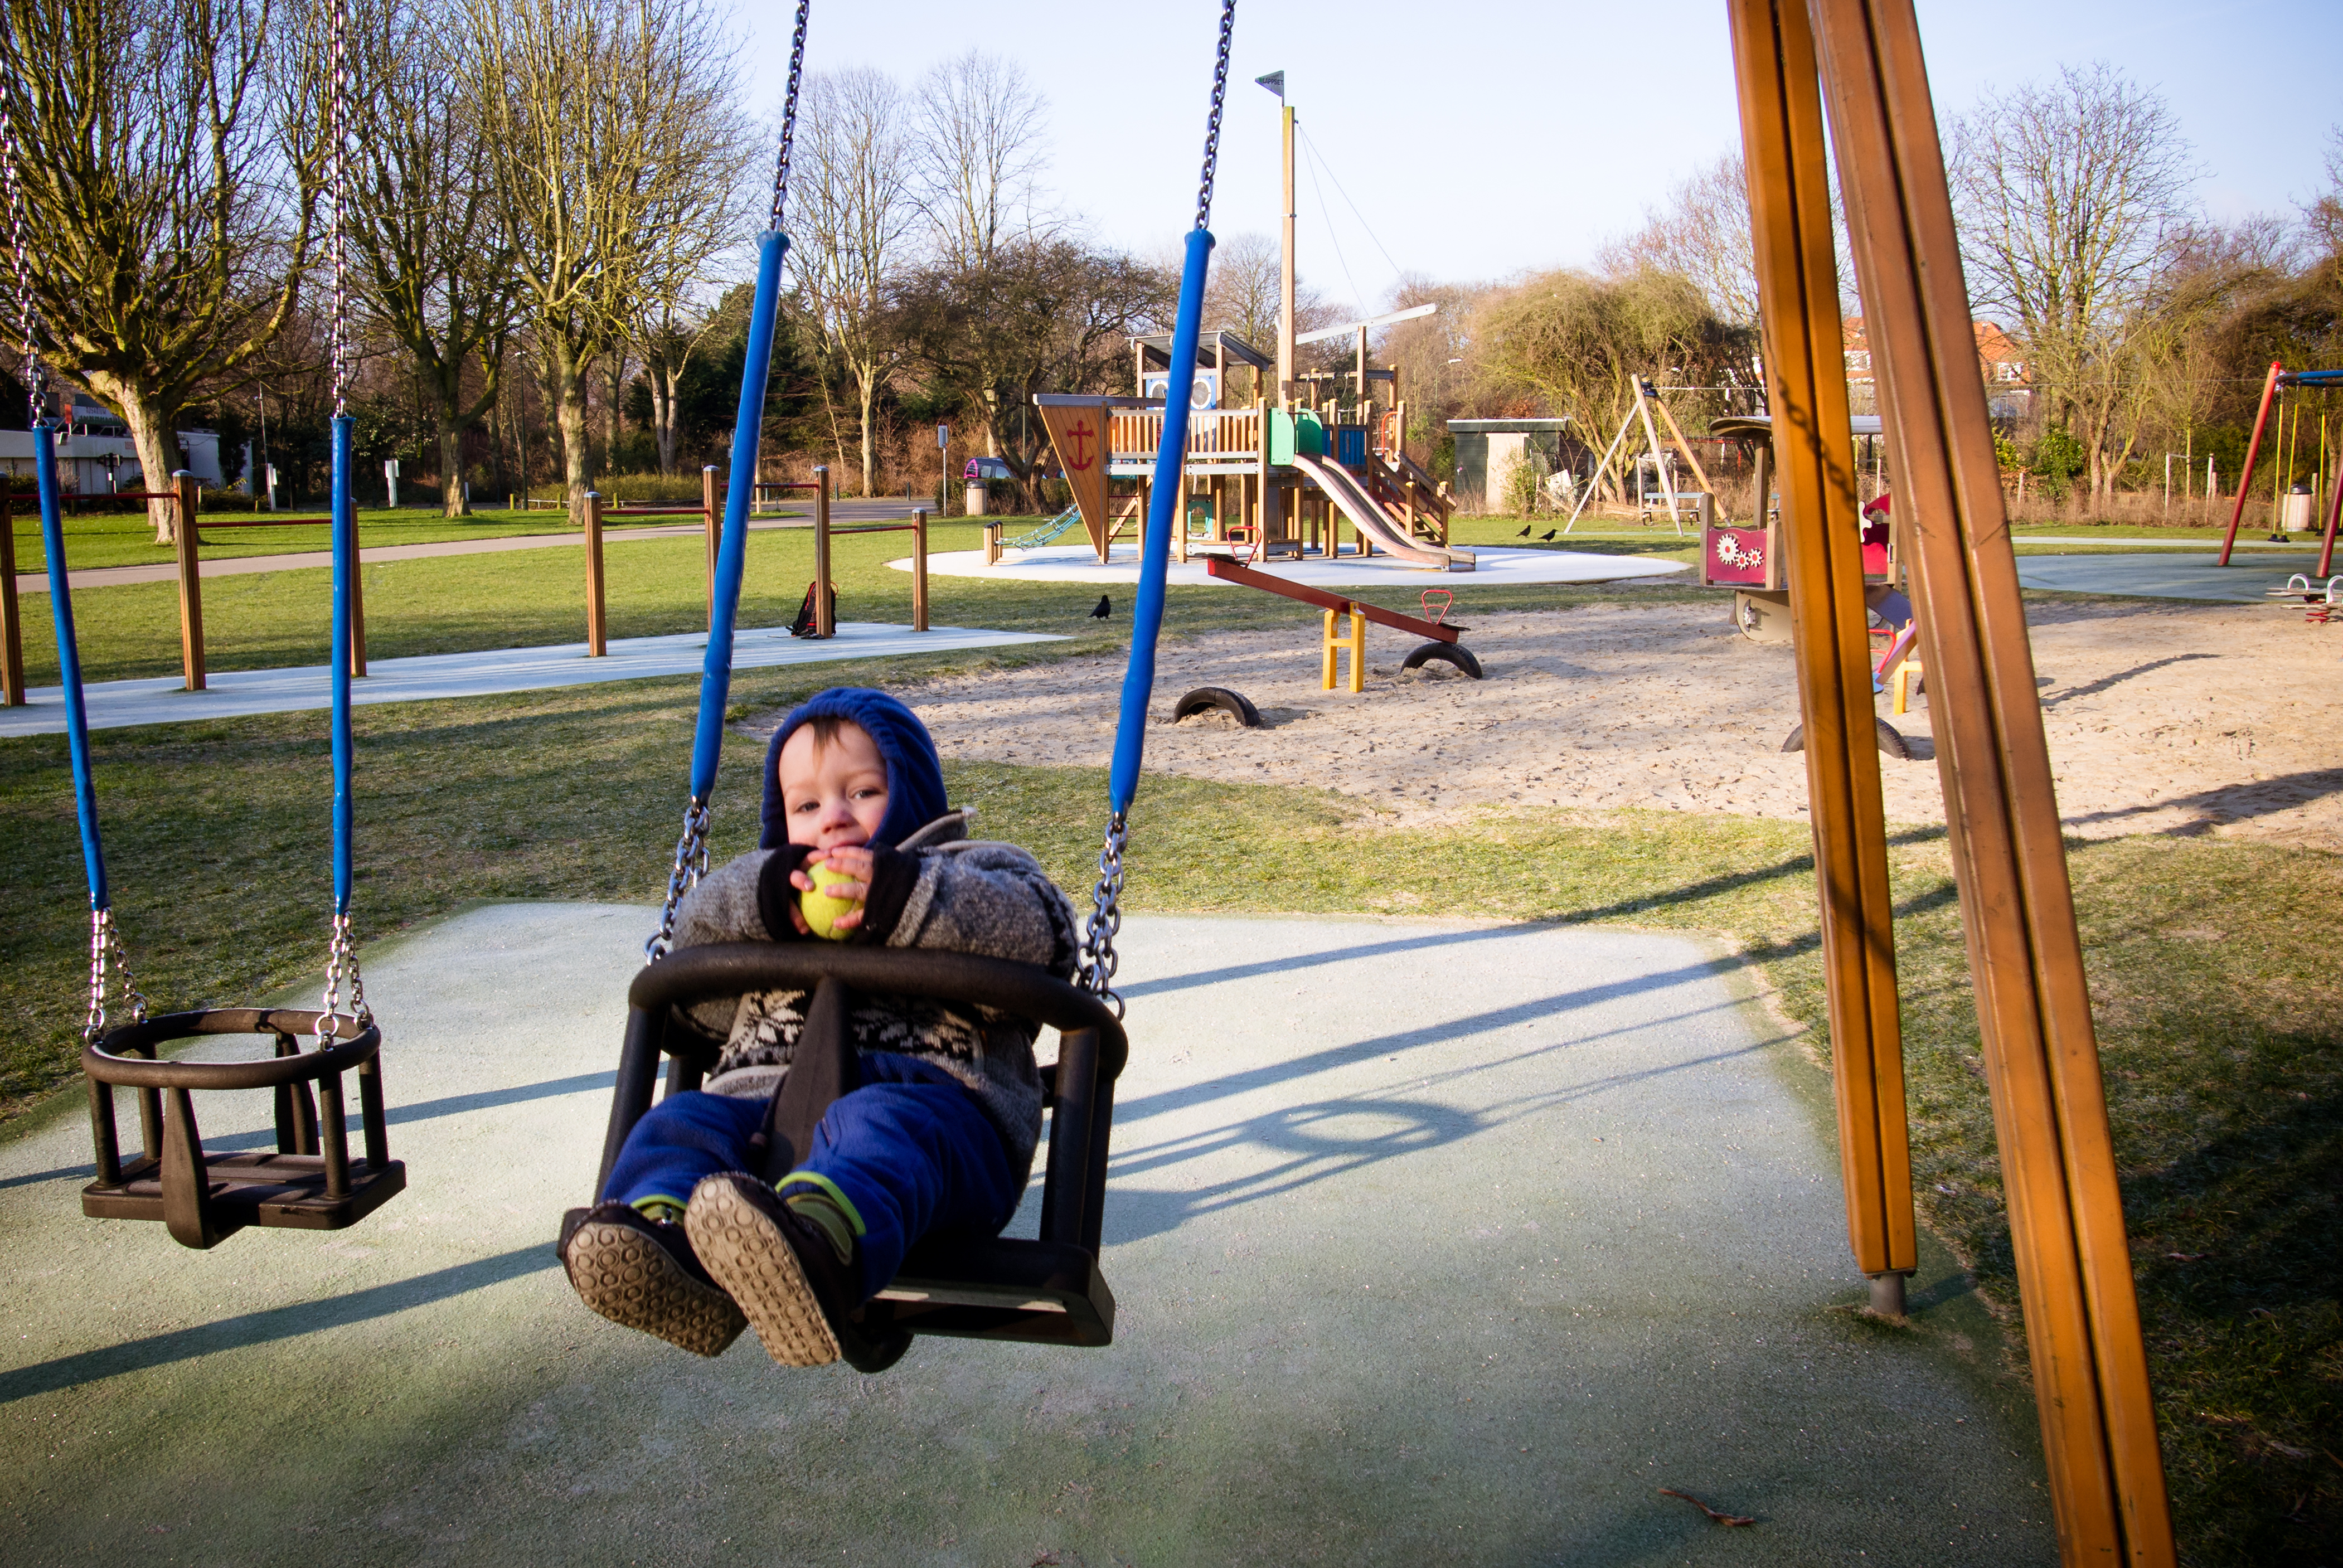 Boy on swing in playground, Action, Park, Kid, Lovely, HQ Photo